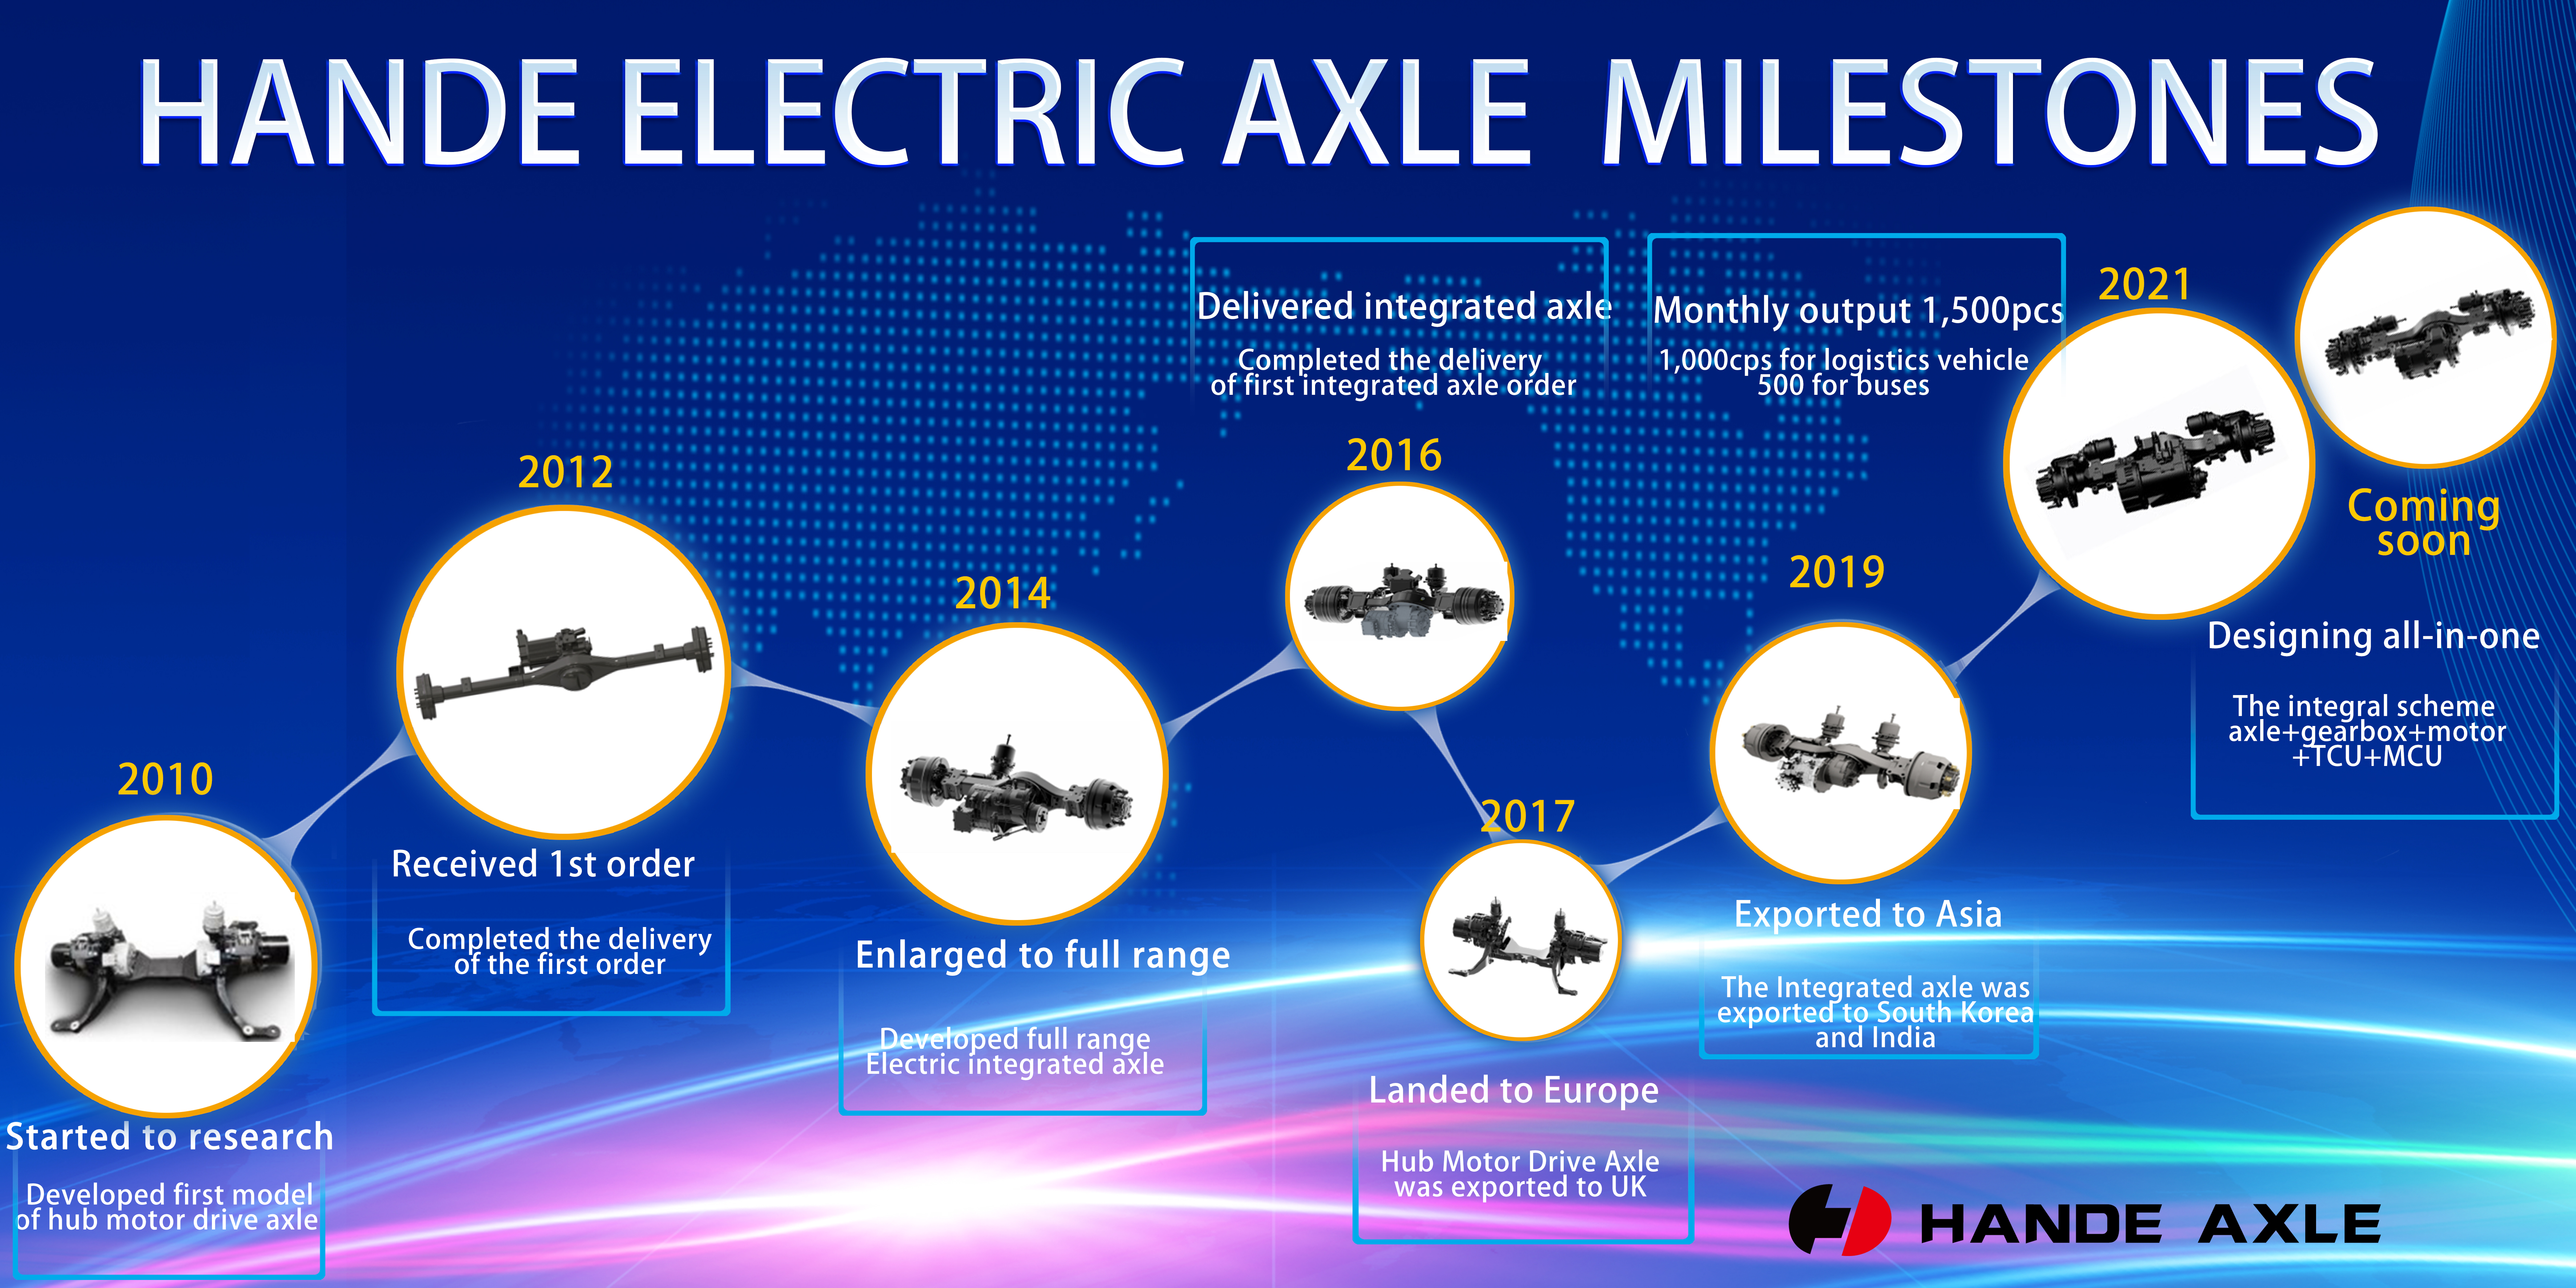 HanDe  Axle has exported the various E-axle products 